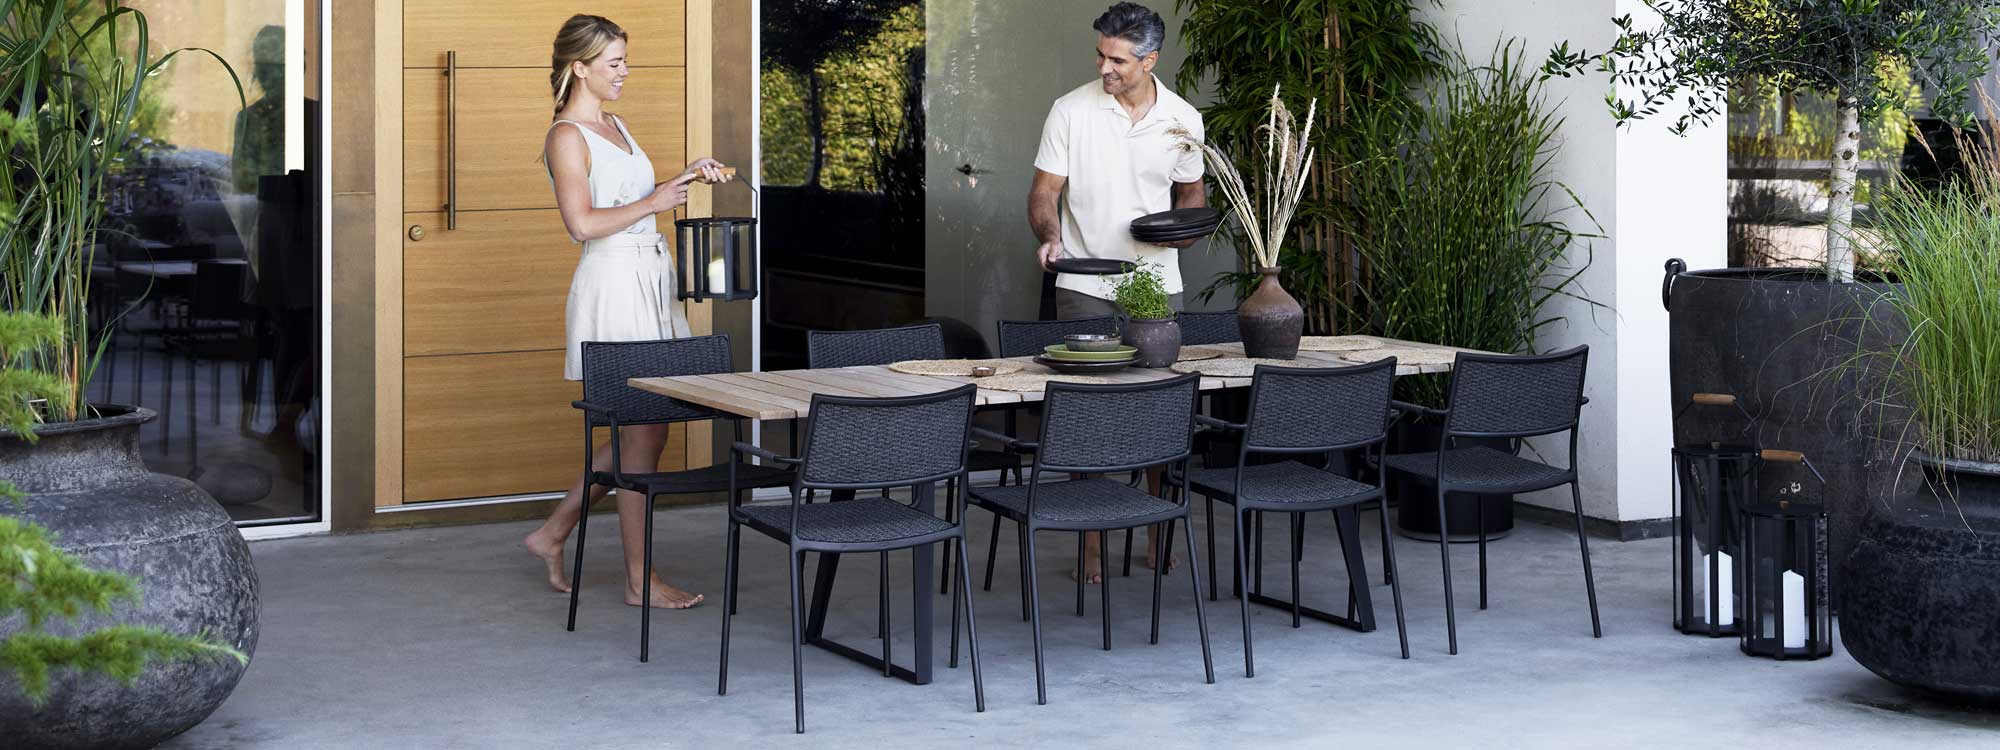 Image of Less Lava-grey chairs and Copenhagen garden table in Lava-grey aluminum with teak top by Caneline